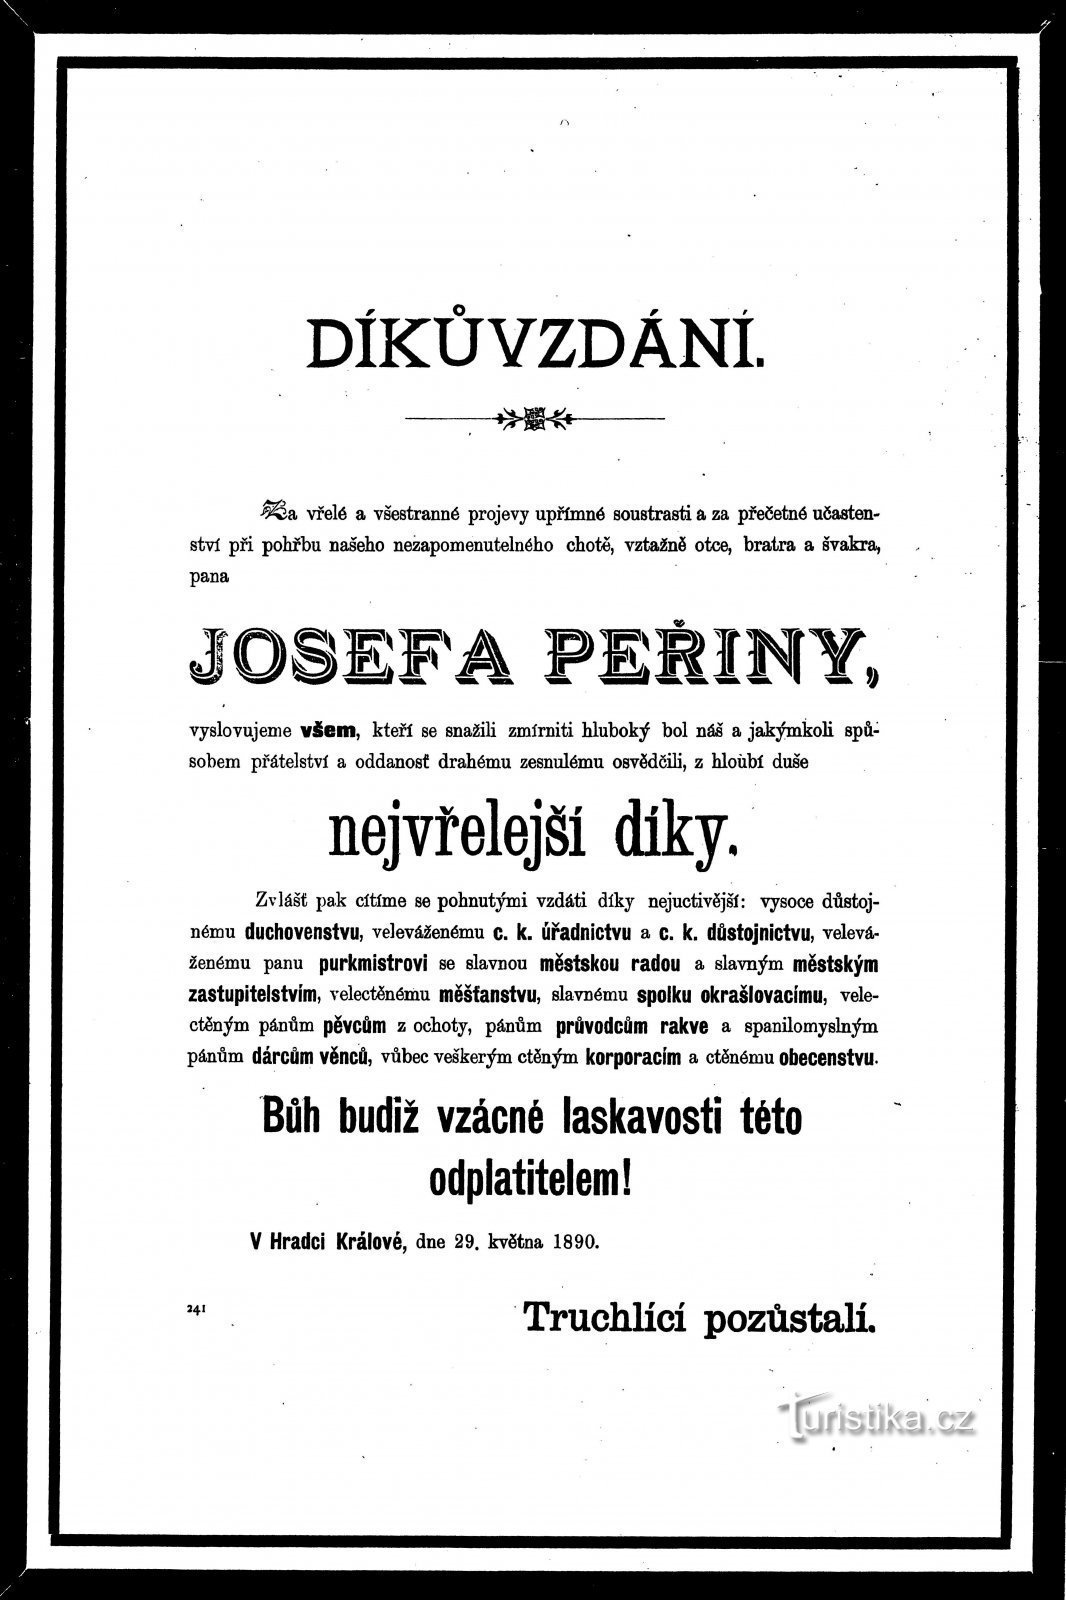 Thanks for attending the funeral of Josef Peřina from 1890